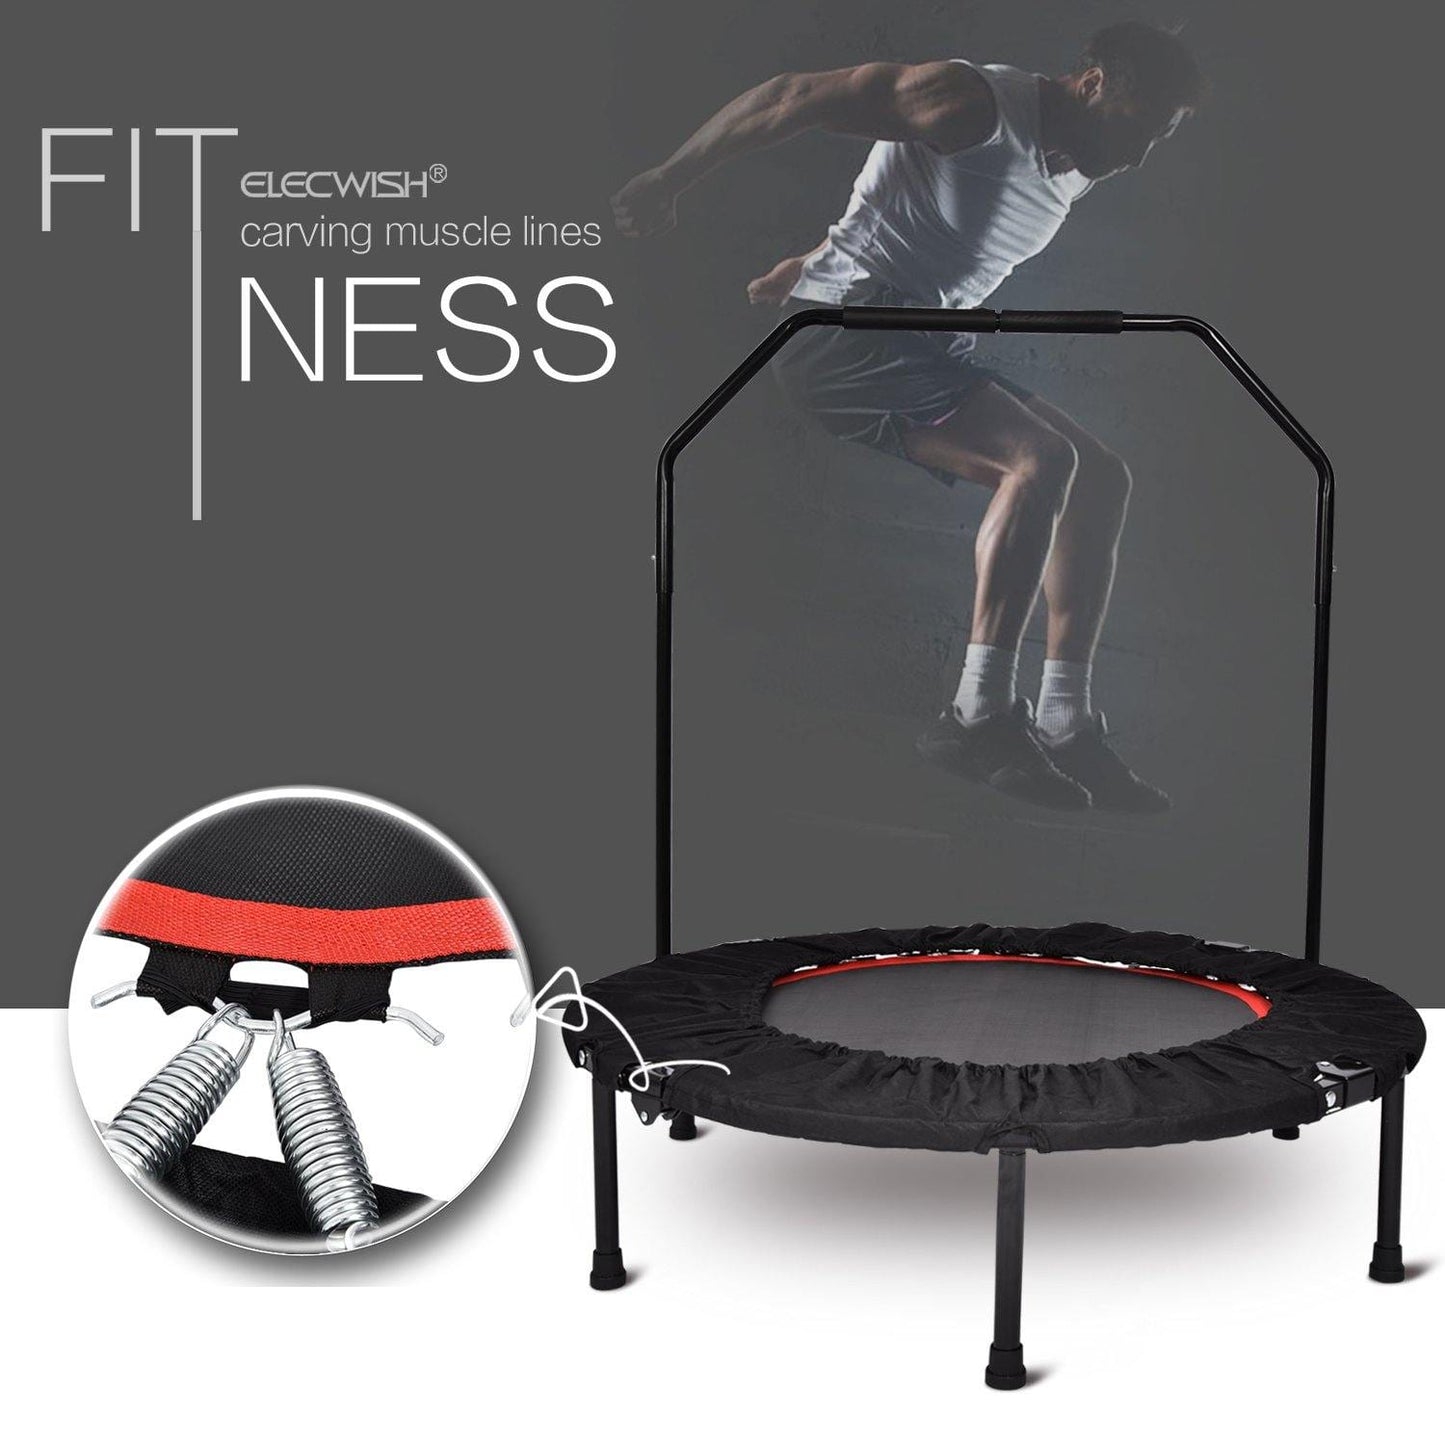 40" Mini Trampoline Rebounder, Portable & Foldable Exercise Trampoline With Handrail For Adults Kids Body Fitness Training Workouts, Indoor/Garden/Workout Cardio - Westfield Retailers